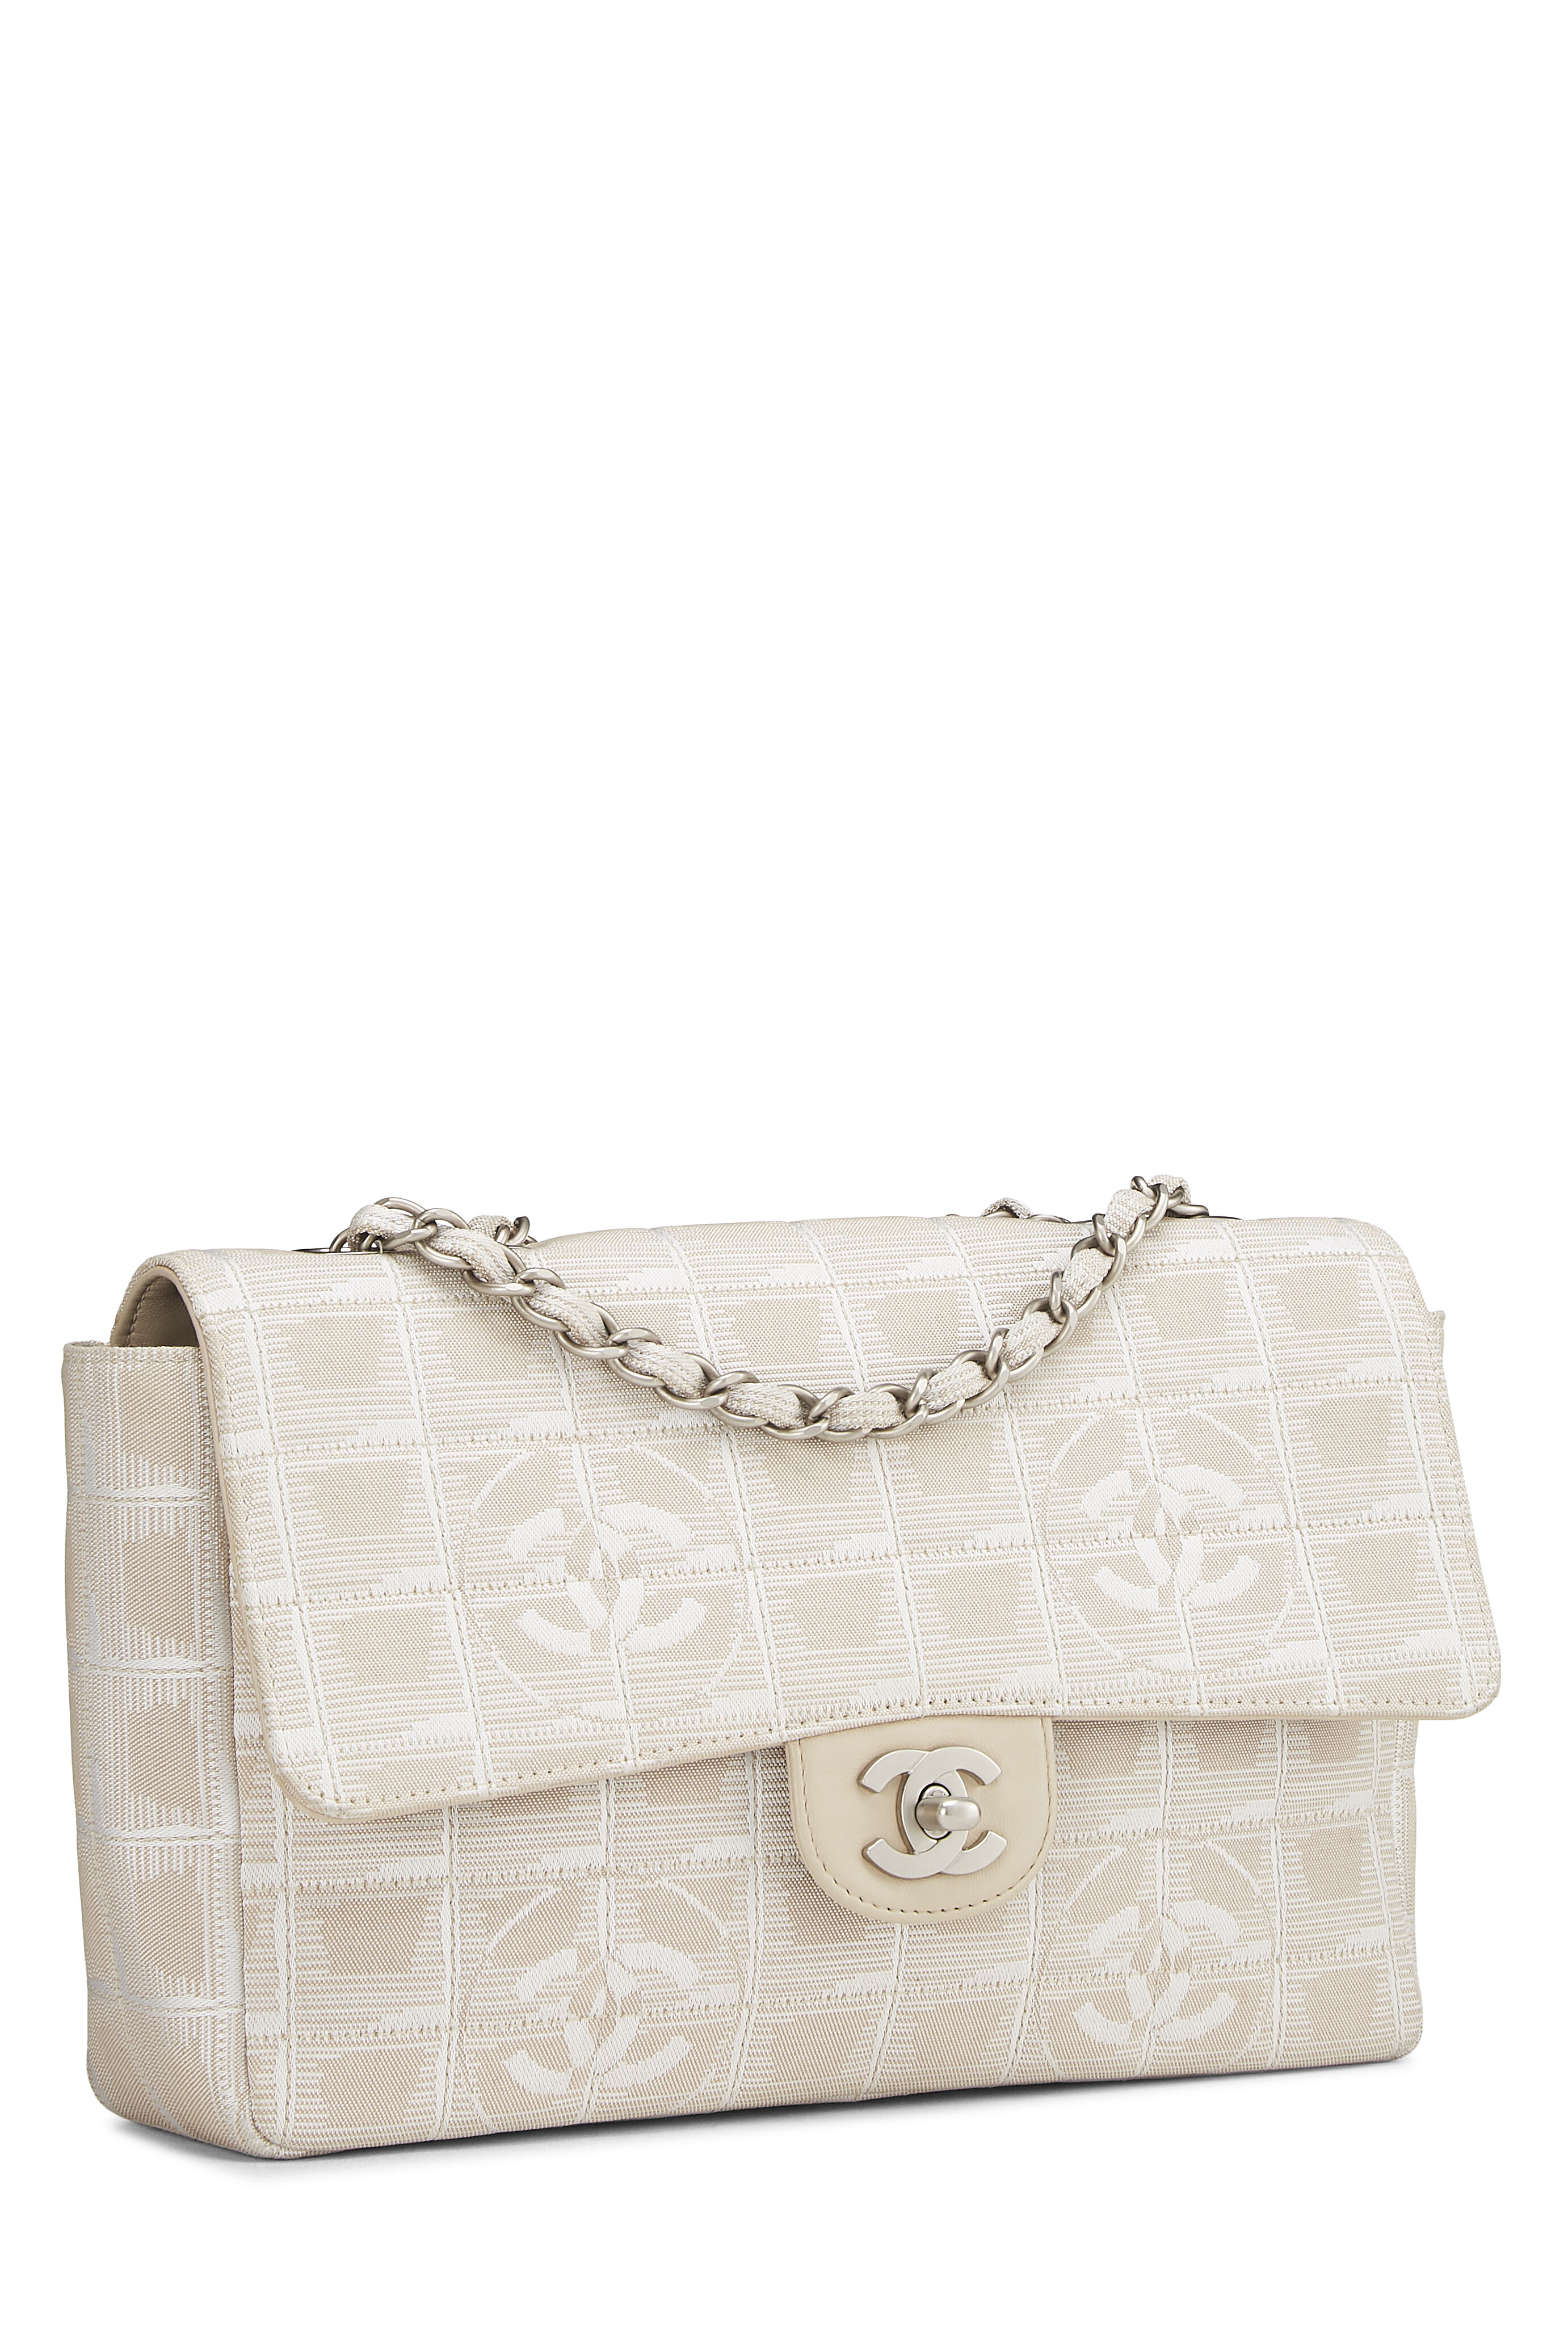 Chanel Beige Cube Quilted Printed Fabric Medium CC Travel Line